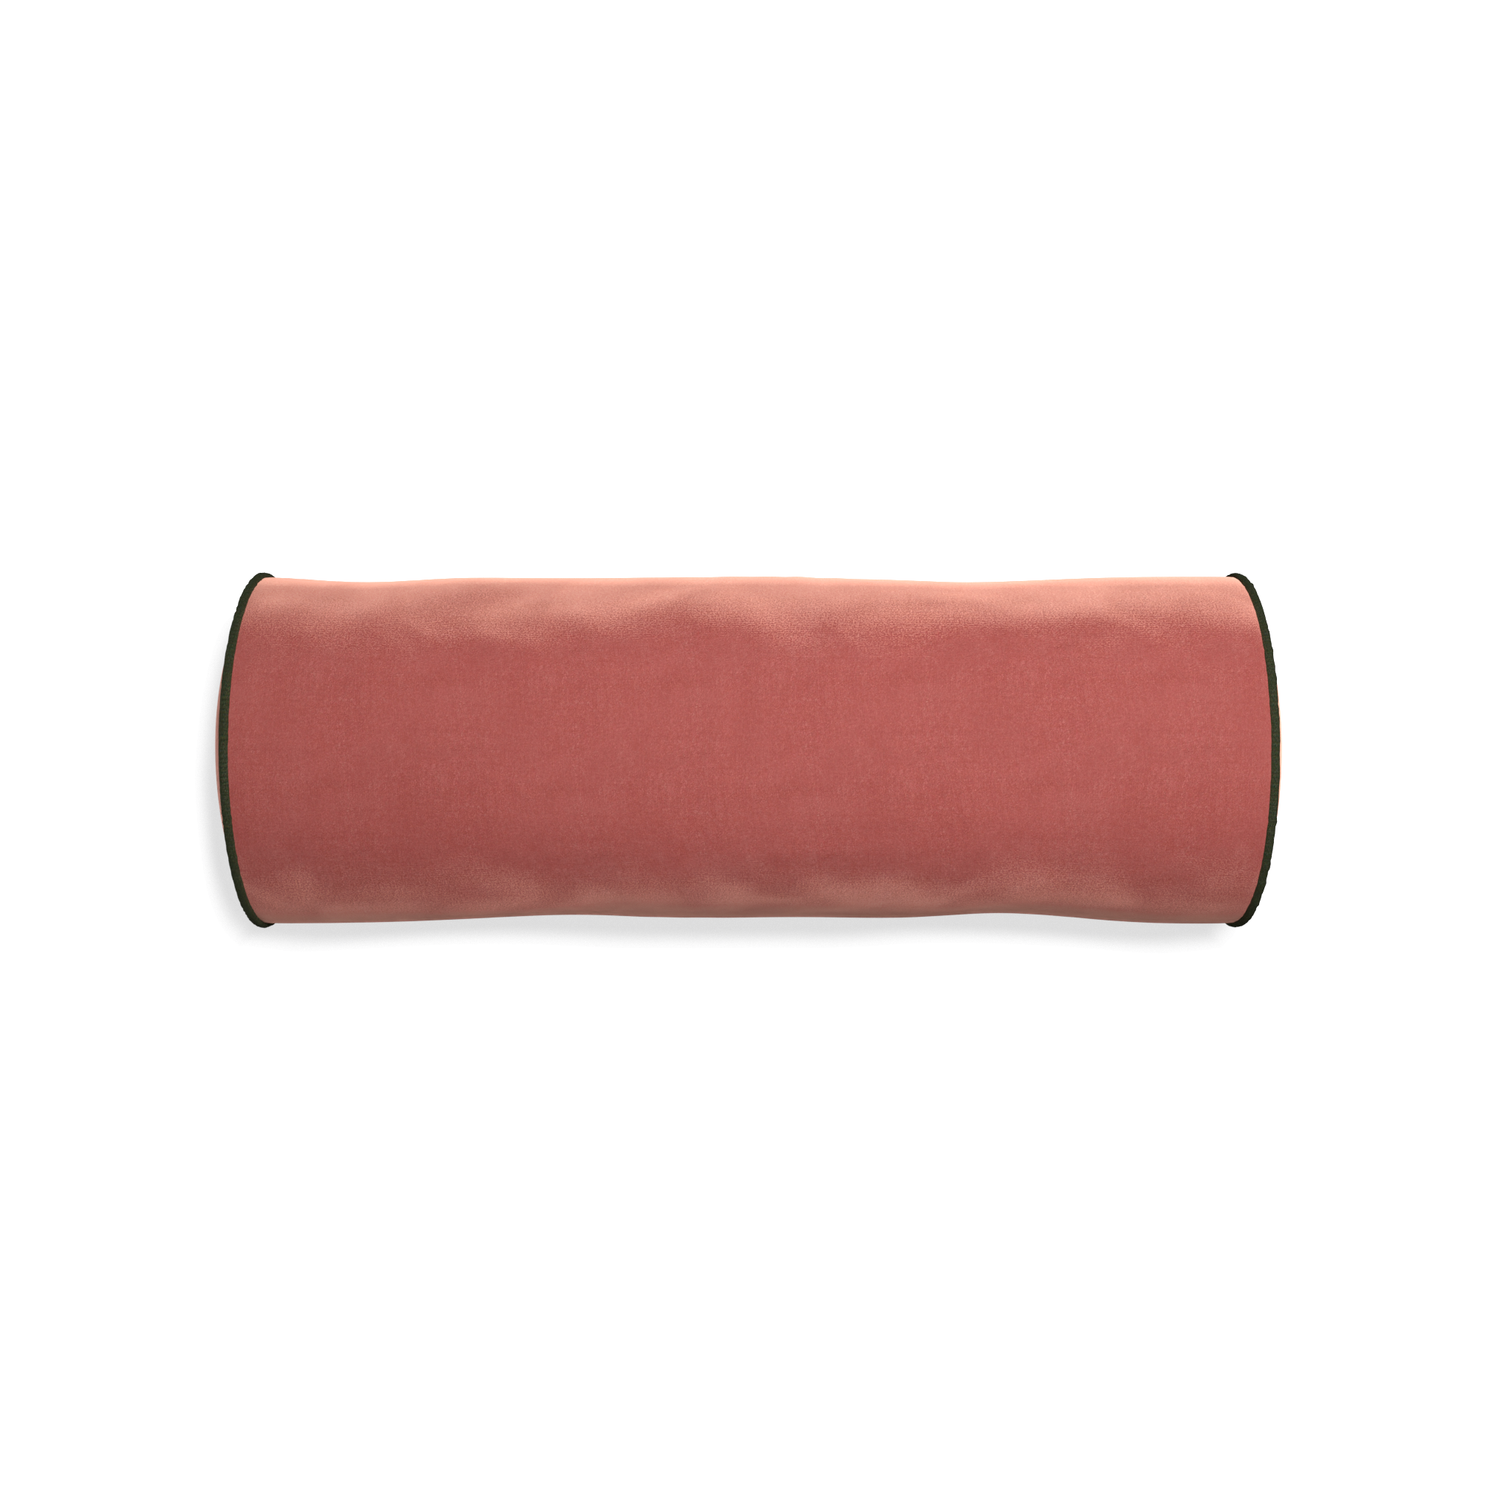 bolster coral velvet pillow with fern green piping